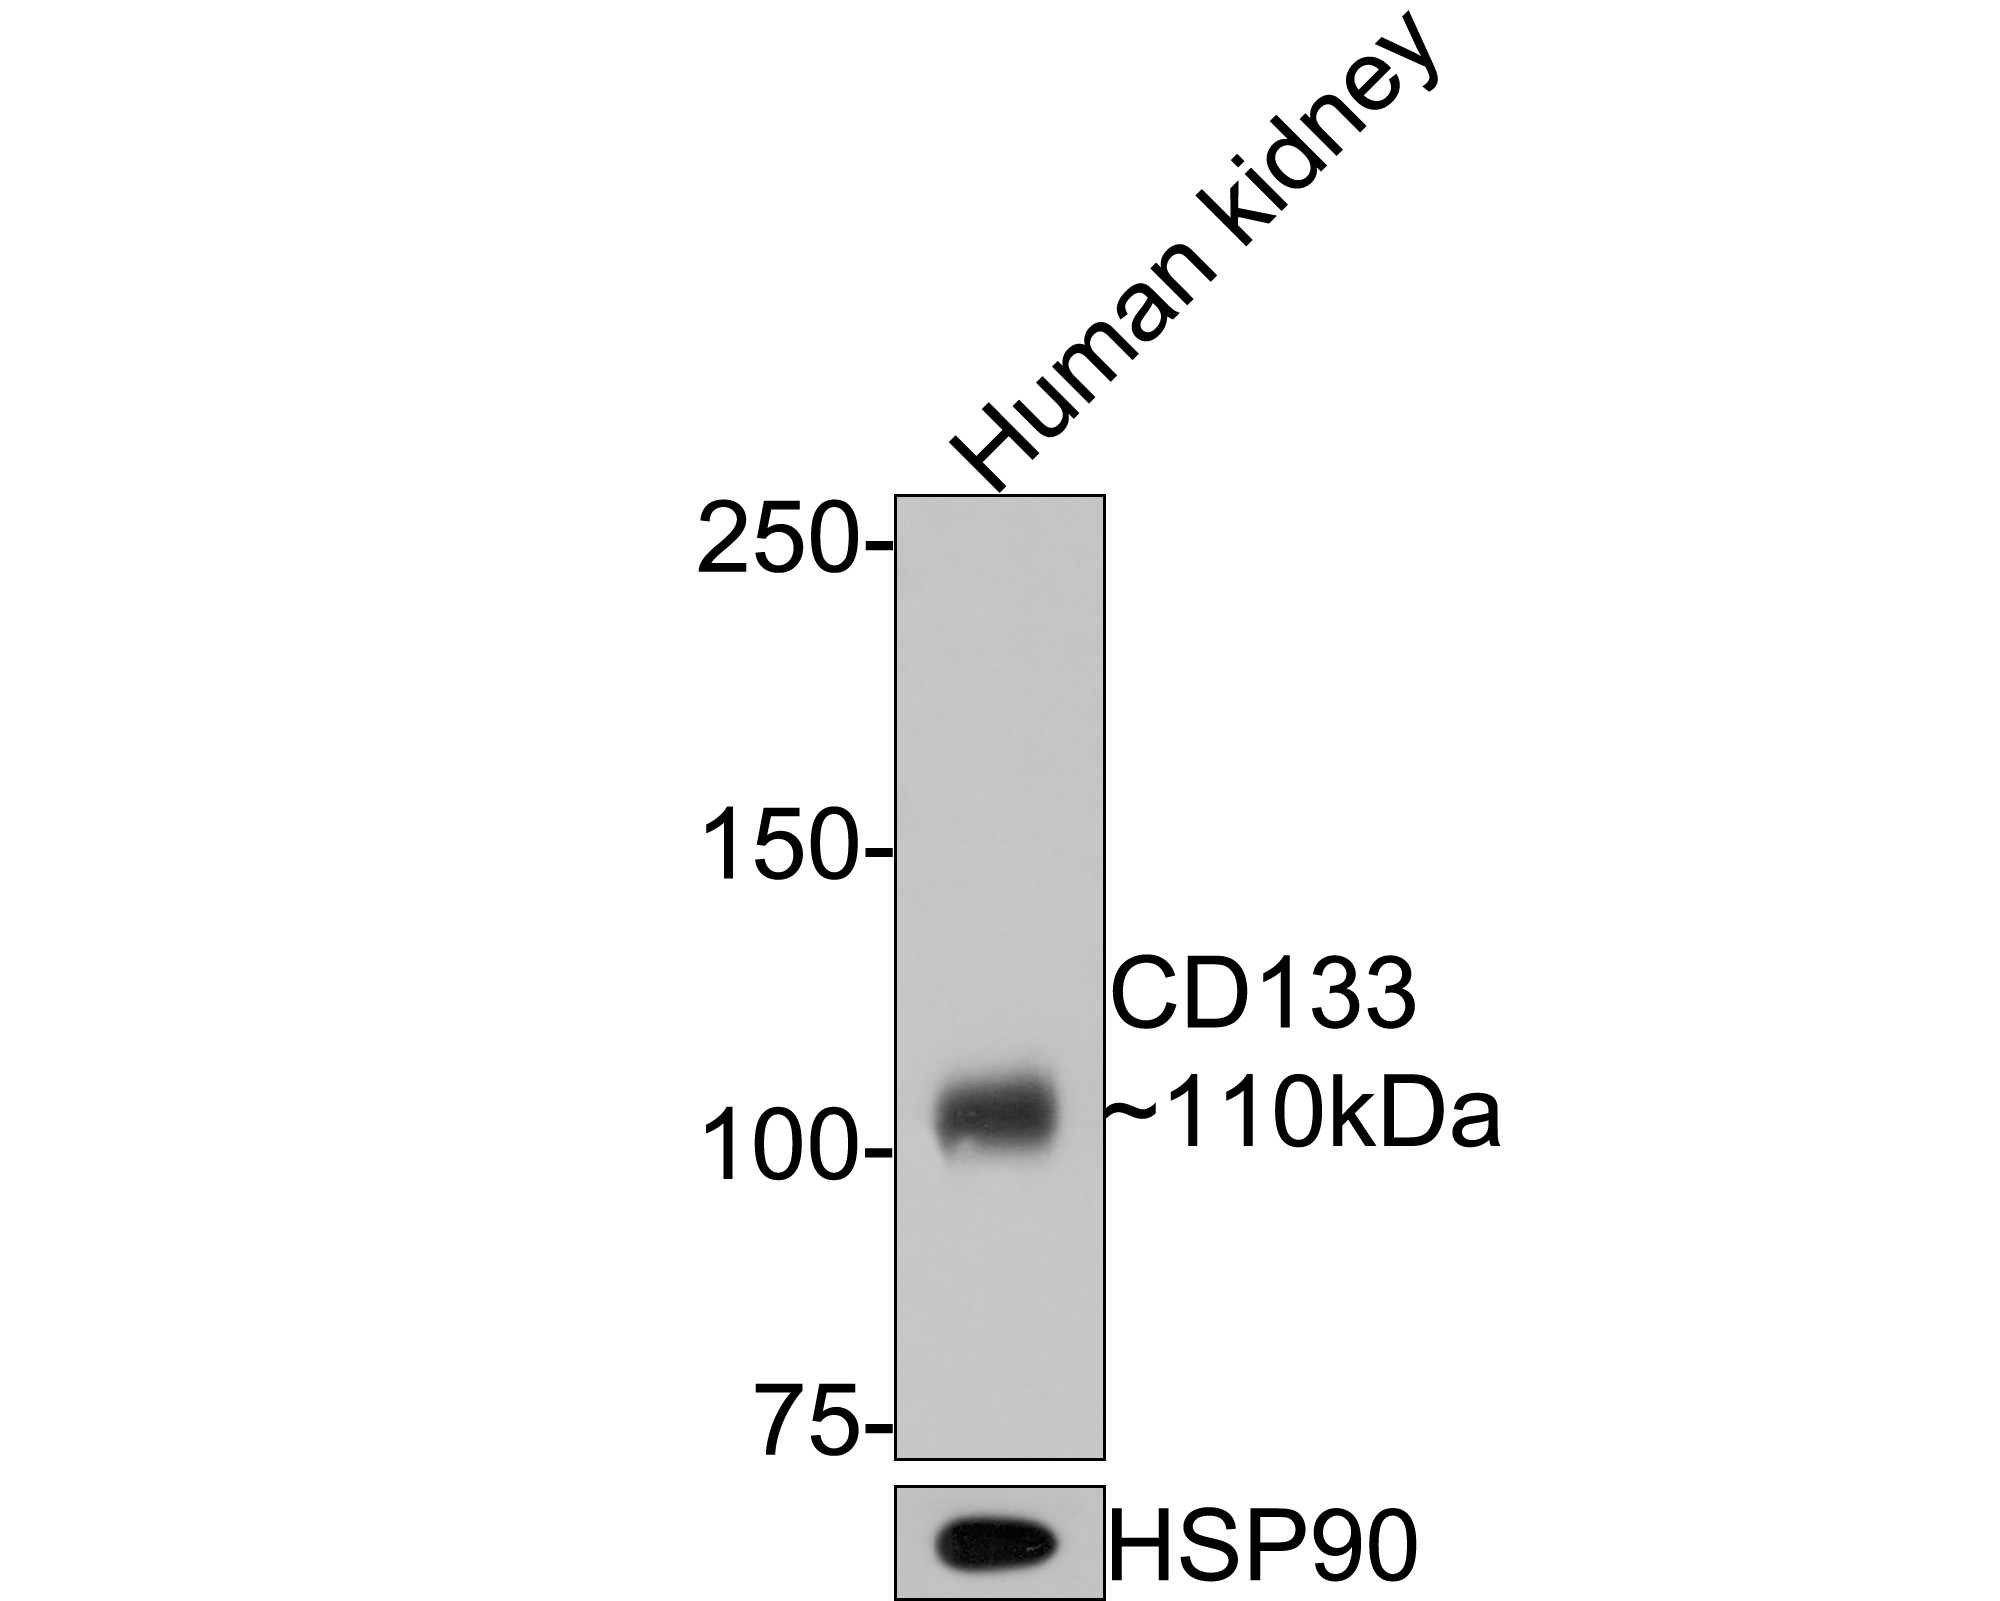 Western blot analysis of CD133 on human kidney tissue lysates with Mouse anti-CD133 antibody (HA601025) at 1/500 dilution.<br />
<br />
Lysates/proteins at 20 µg/Lane.<br />
<br />
Predicted band size: 97 kDa<br />
Observed band size: 110 kDa<br />
<br />
Exposure time: 30 seconds;<br />
<br />
6% SDS-PAGE gel.<br />
<br />
Proteins were transferred to a PVDF membrane and blocked with 5% NFDM/TBST for 1 hour at room temperature. The primary antibody (HA601025) at 1/500 dilution was used in 5% NFDM/TBST at room temperature for 2 hours. Goat Anti-Mouse IgG - HRP Secondary Antibody (HA1006) at 1:100,000 dilution was used for 1 hour at room temperature.